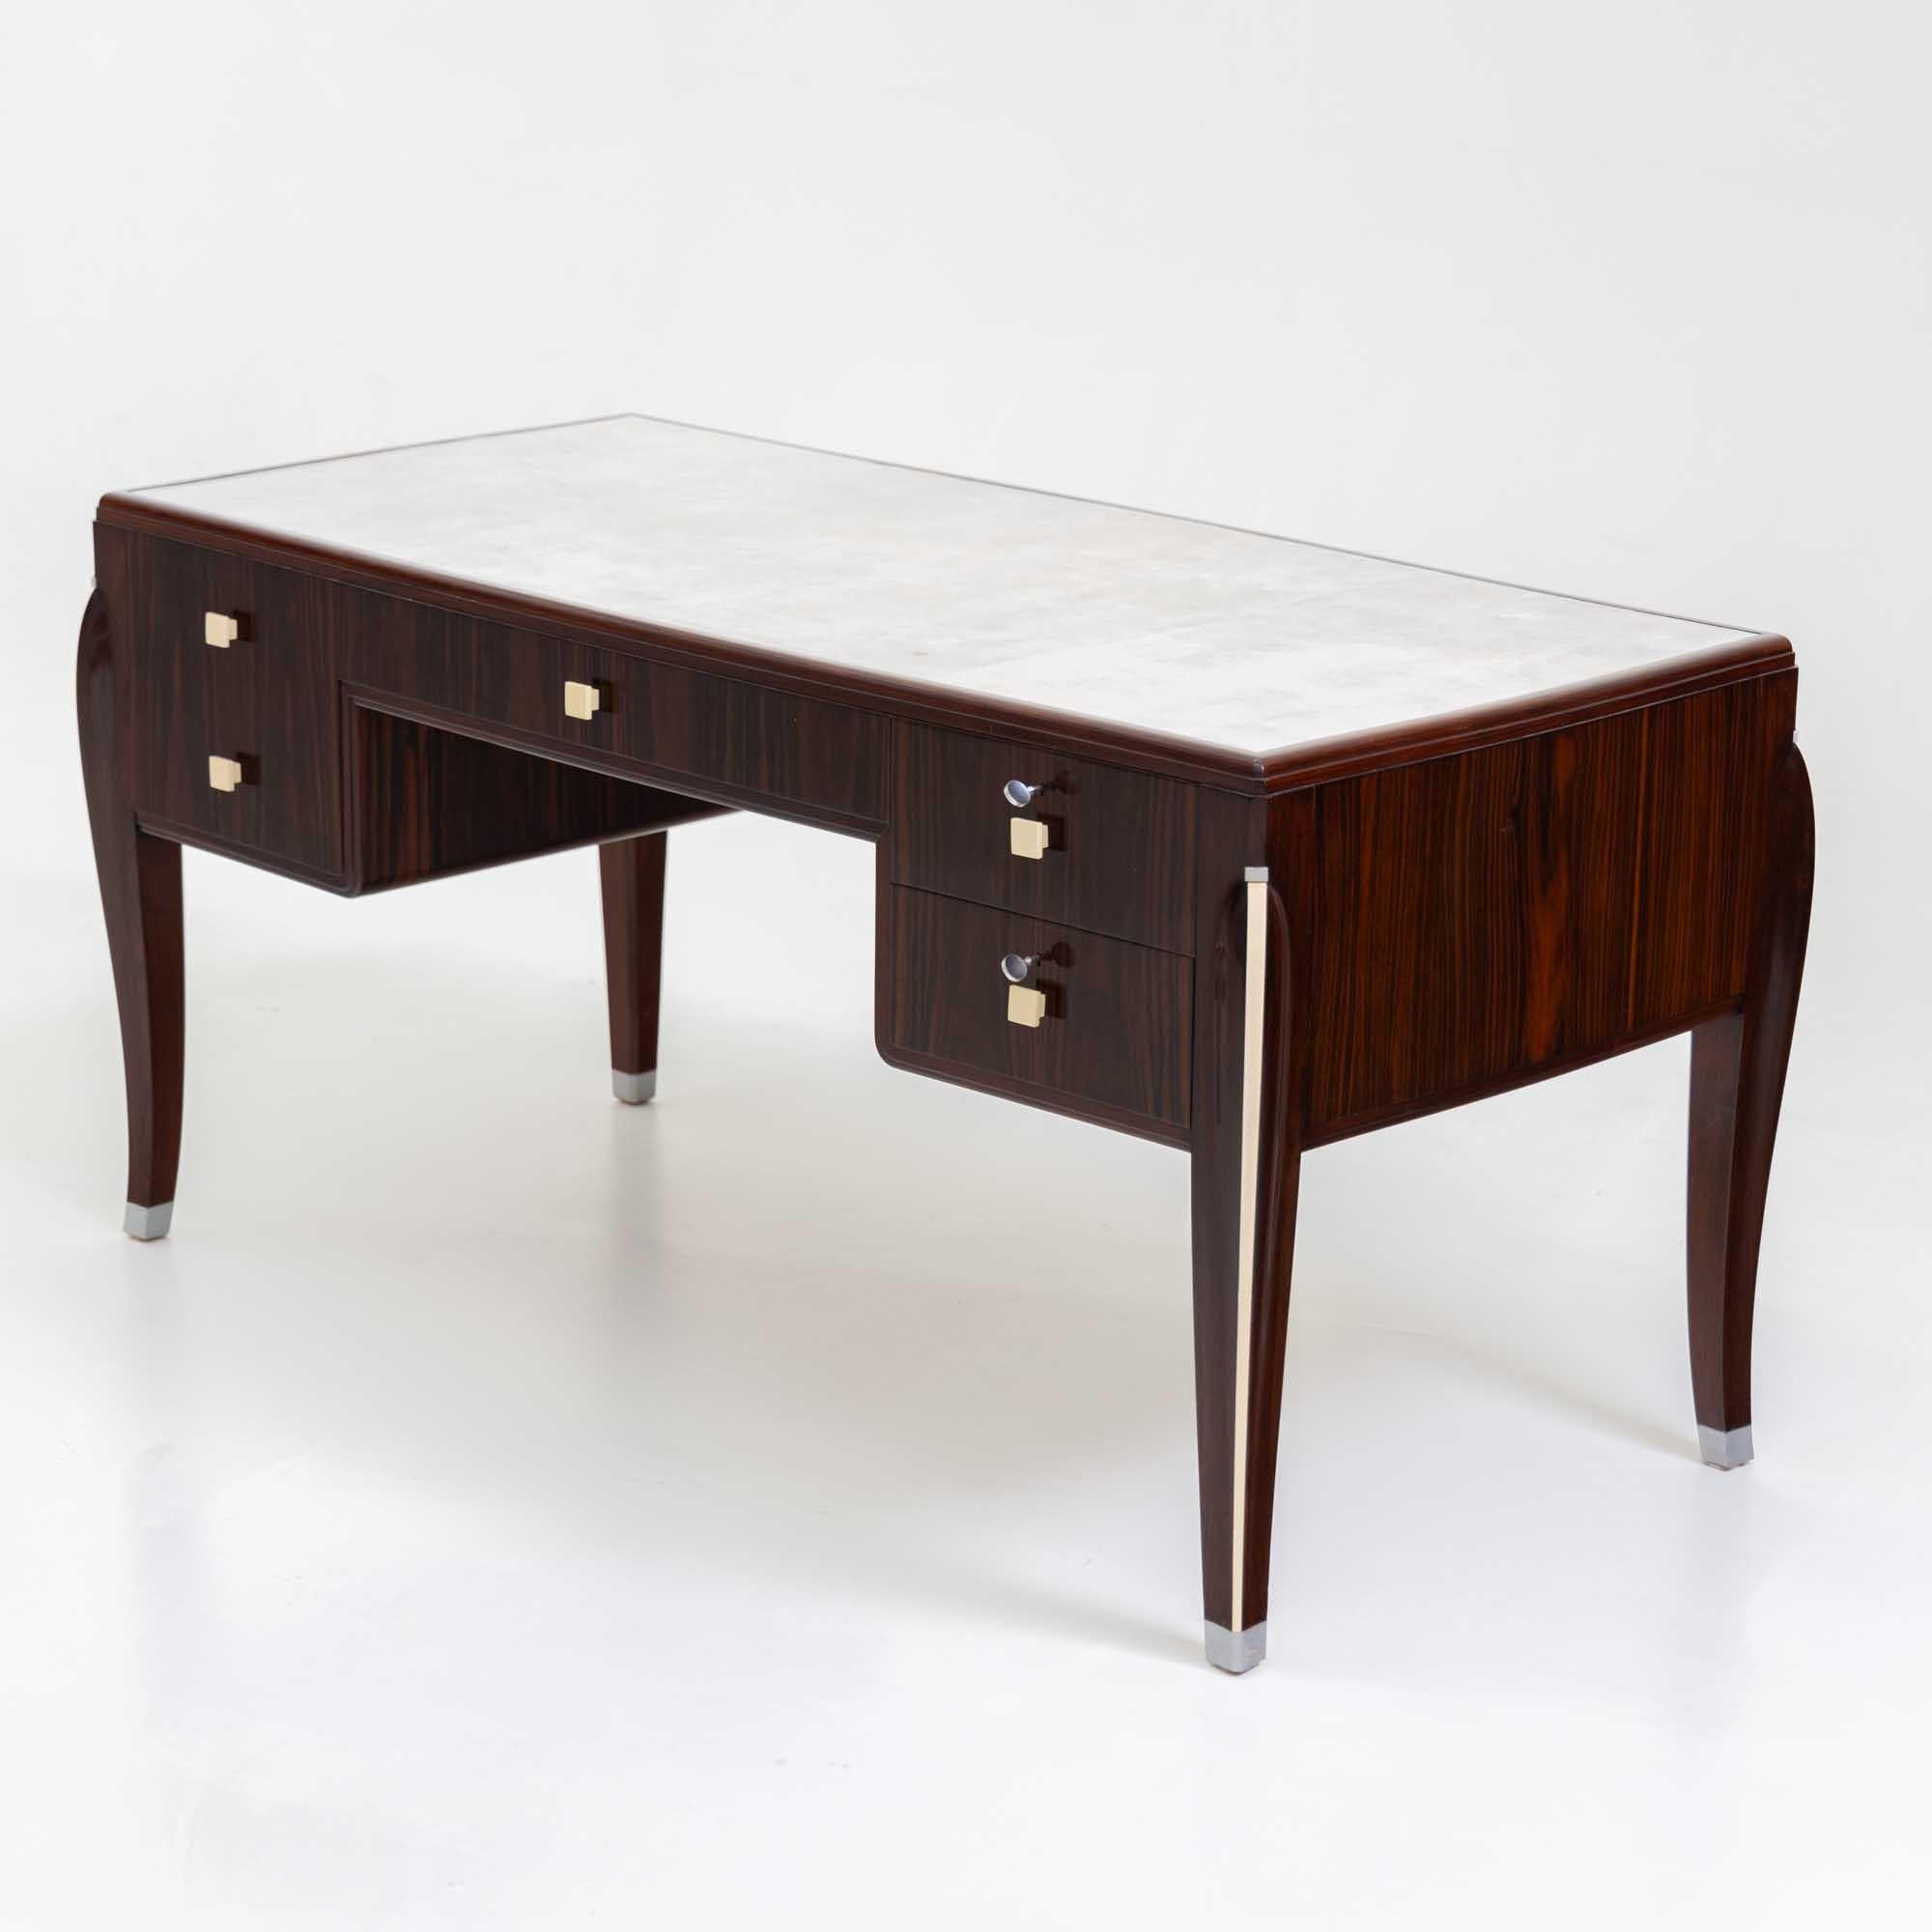 Elegant Art Deco desk on curved tapered legs. The desk has a corresponding design on the front and back and offers plenty of storage space with four drawers. The left-hand drawer is fitted with two off-white handles to maintain symmetry. The top is